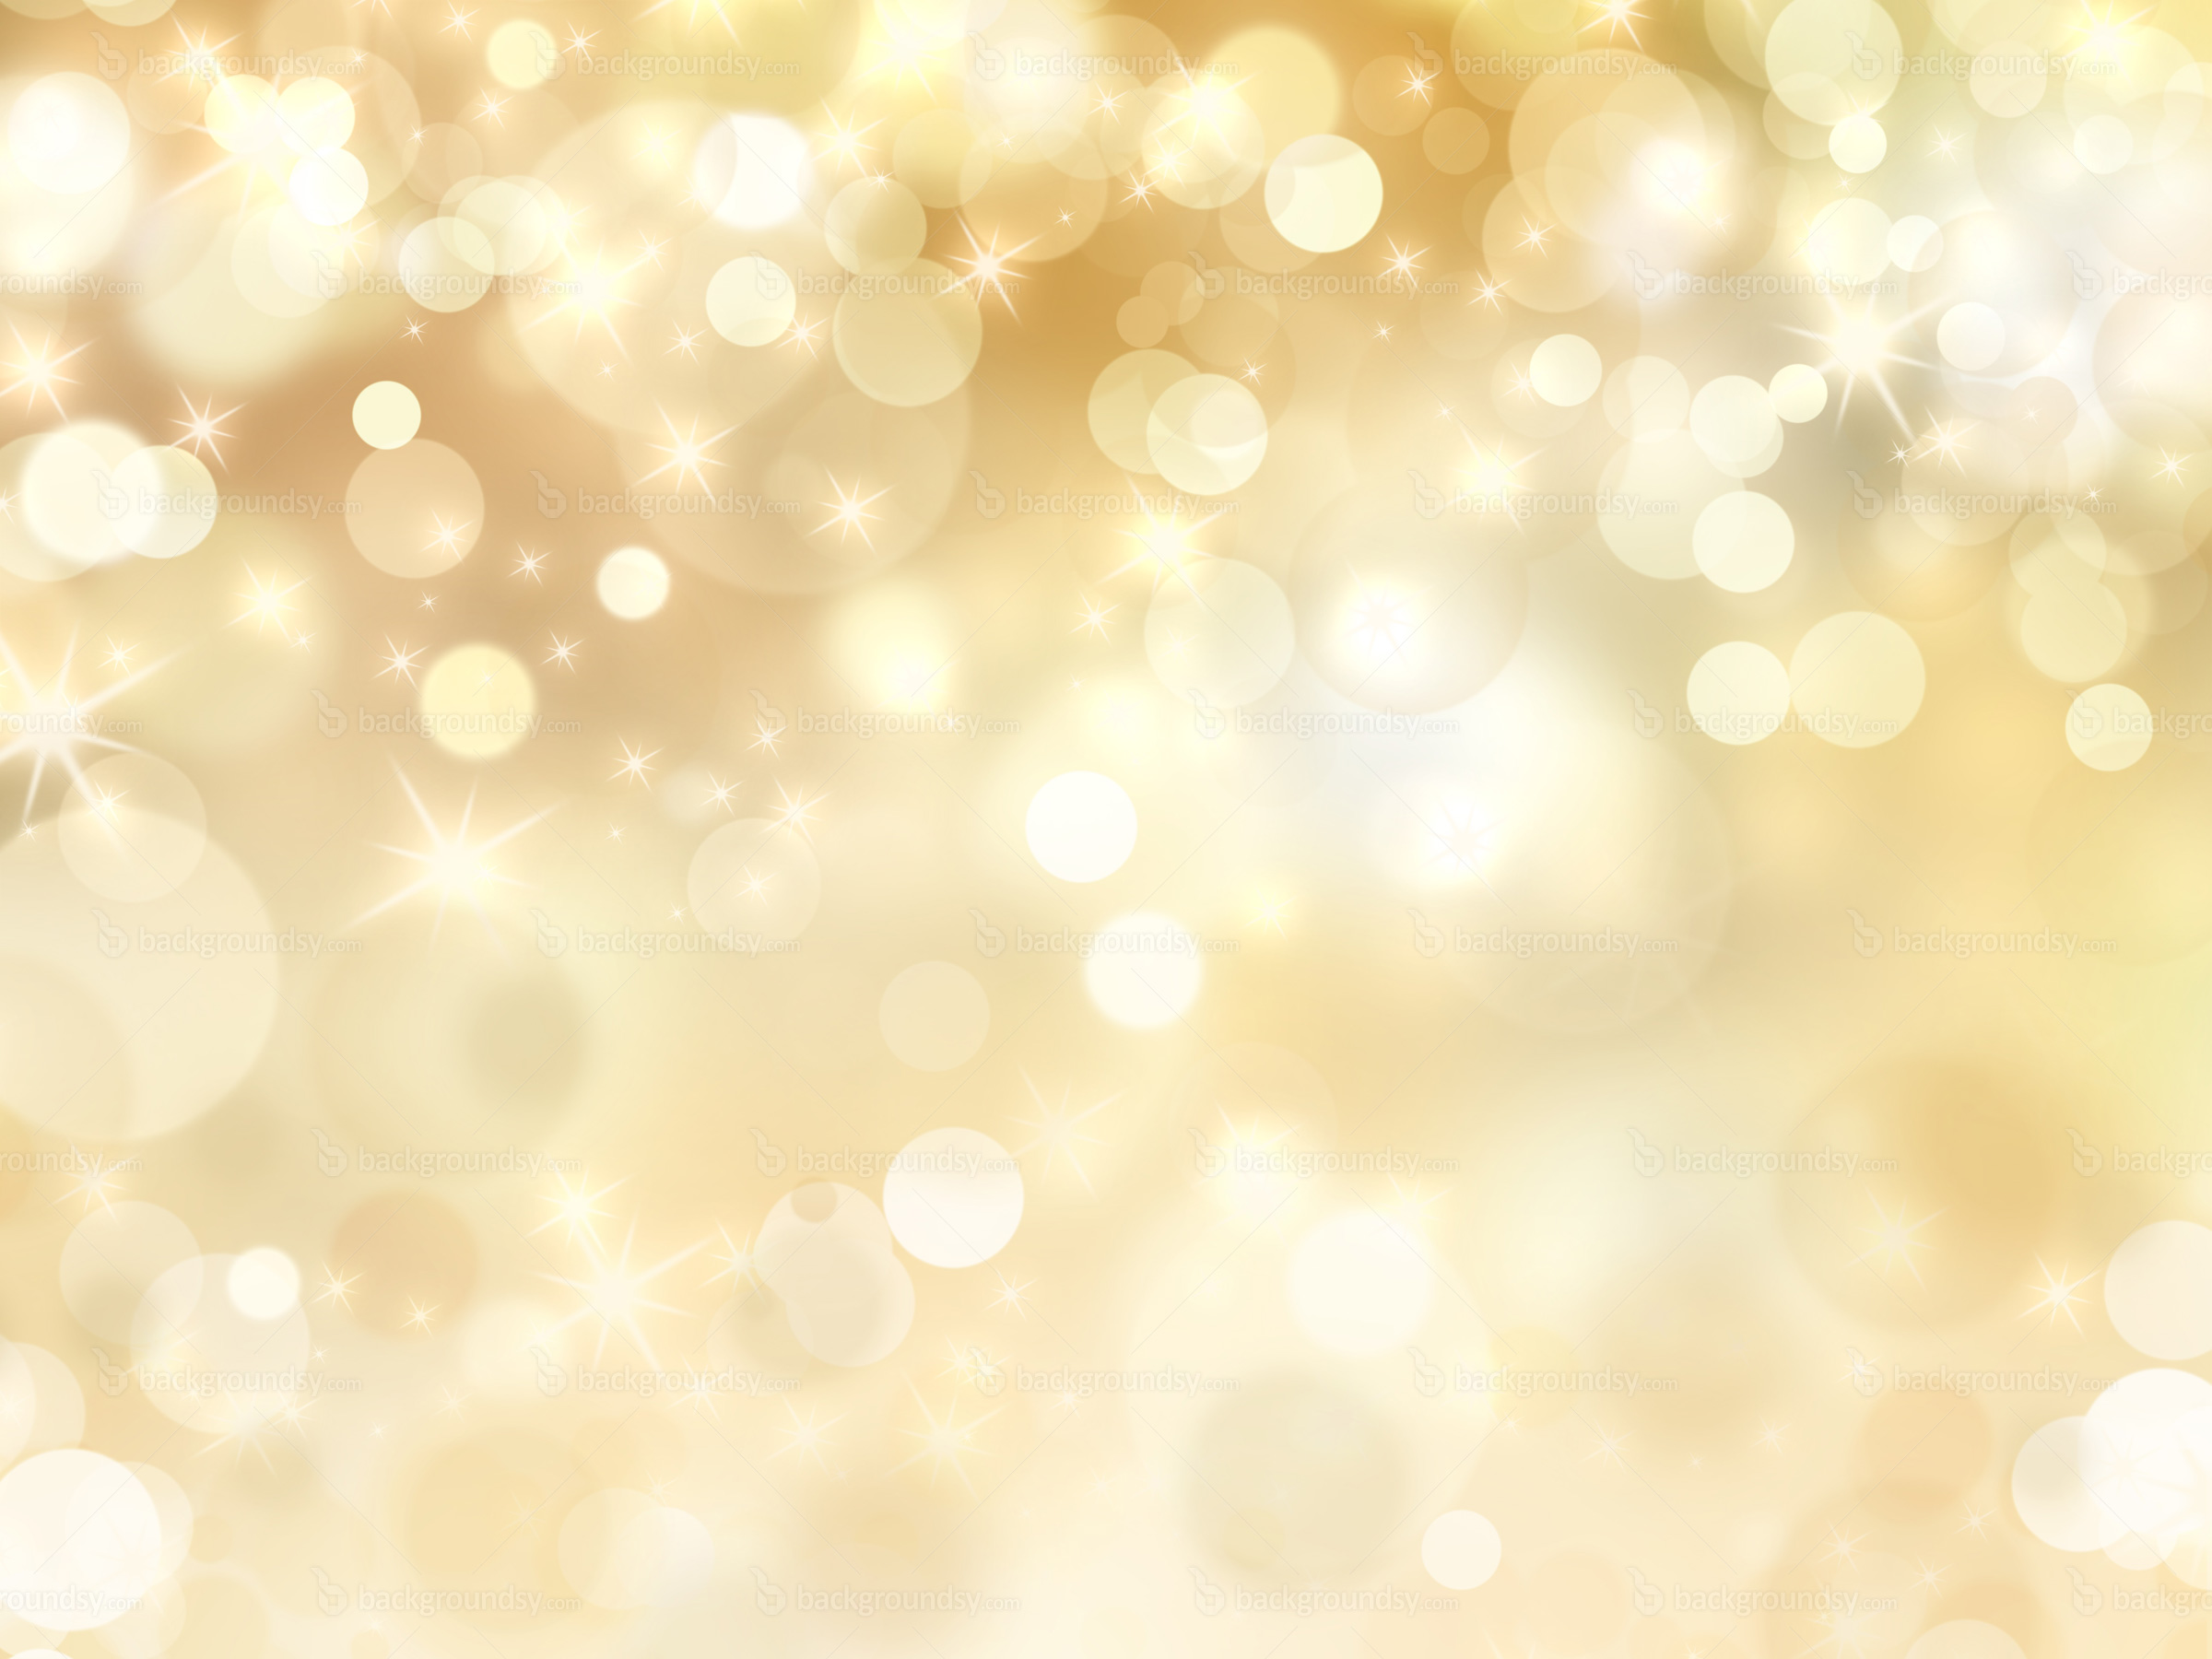 Gold Christmas Background Wallpaper Image